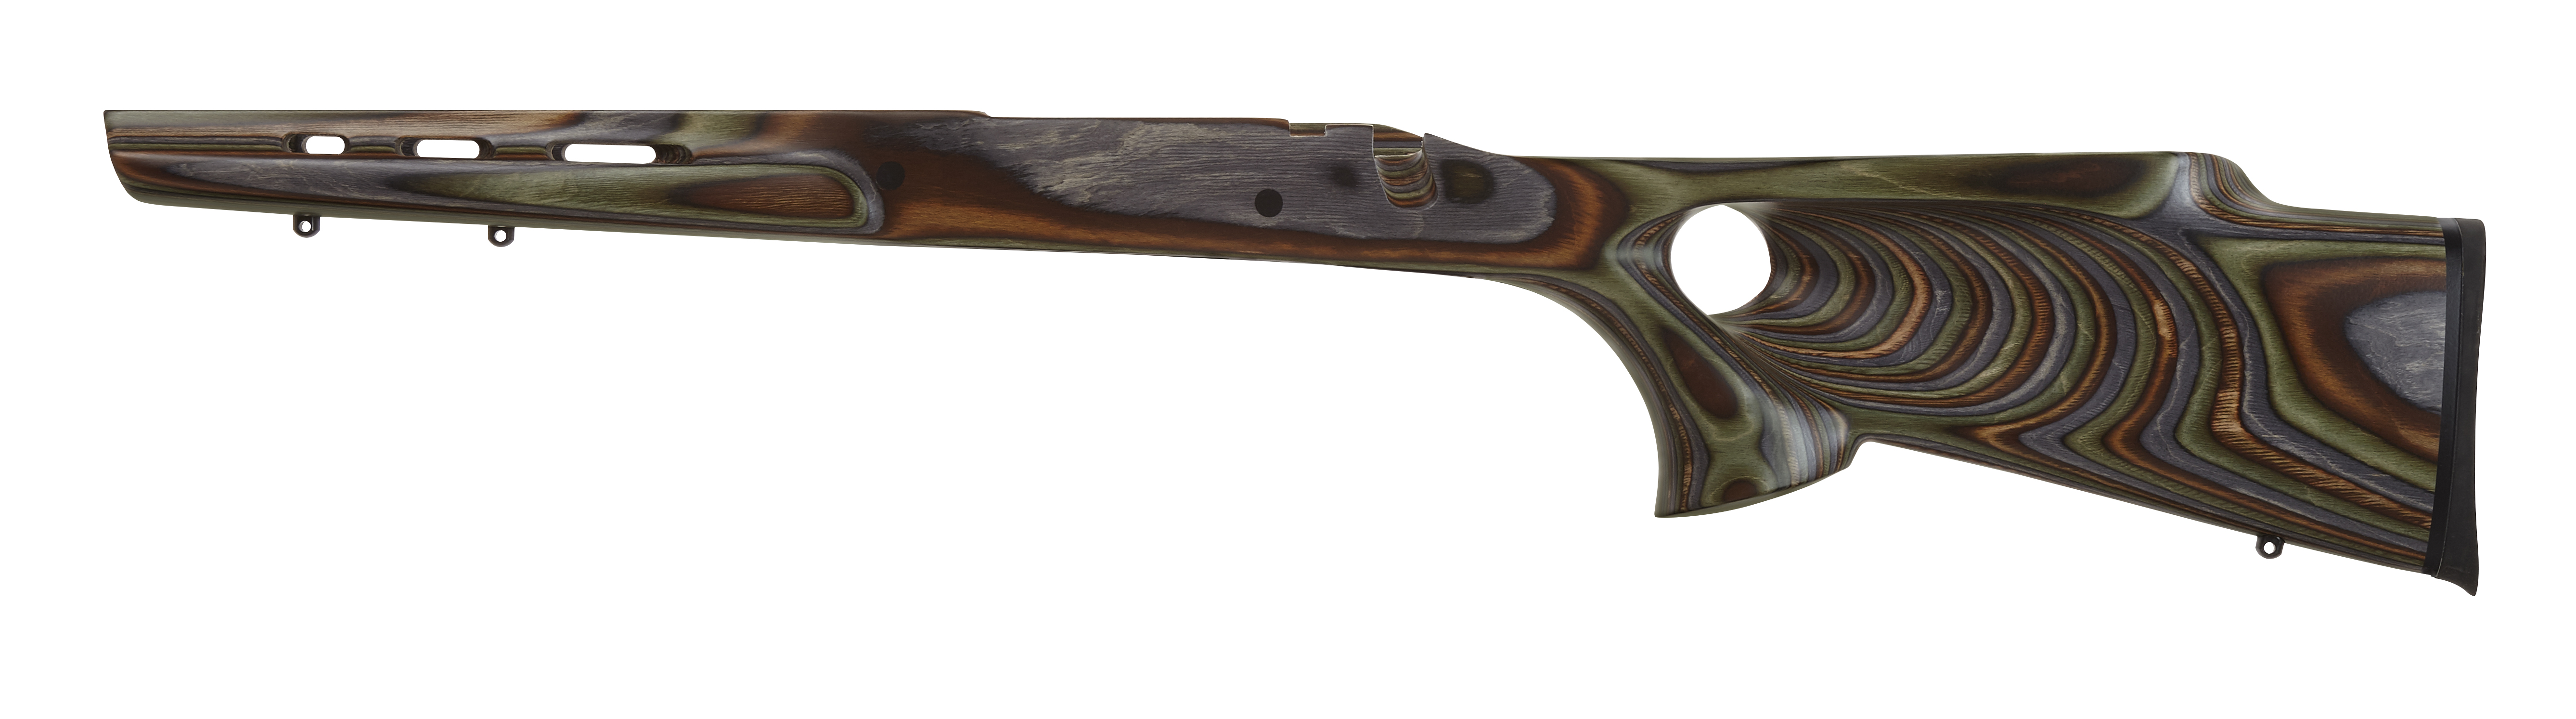 Boyds FW Thumbhole Wood Stock-Camo for Ruger American Magnum/Long Action 